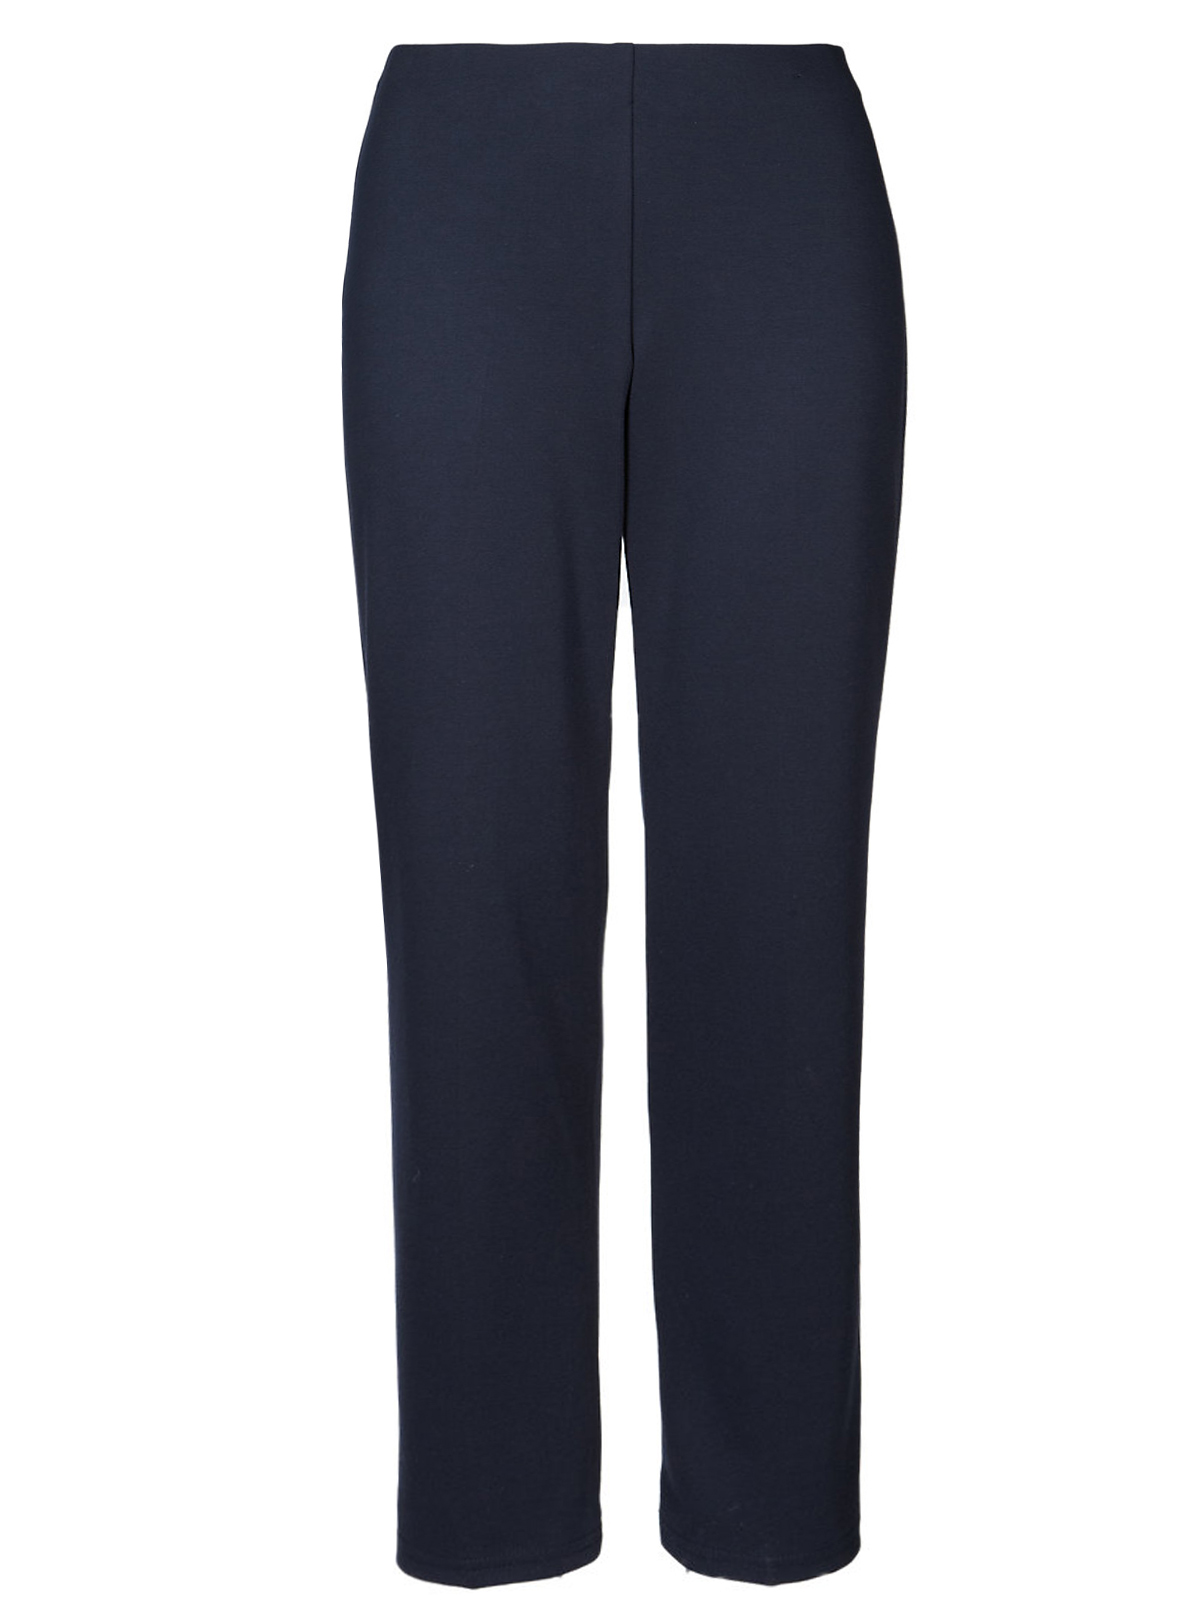 Women’s Black Twill Trousers | Hawes & Curtis